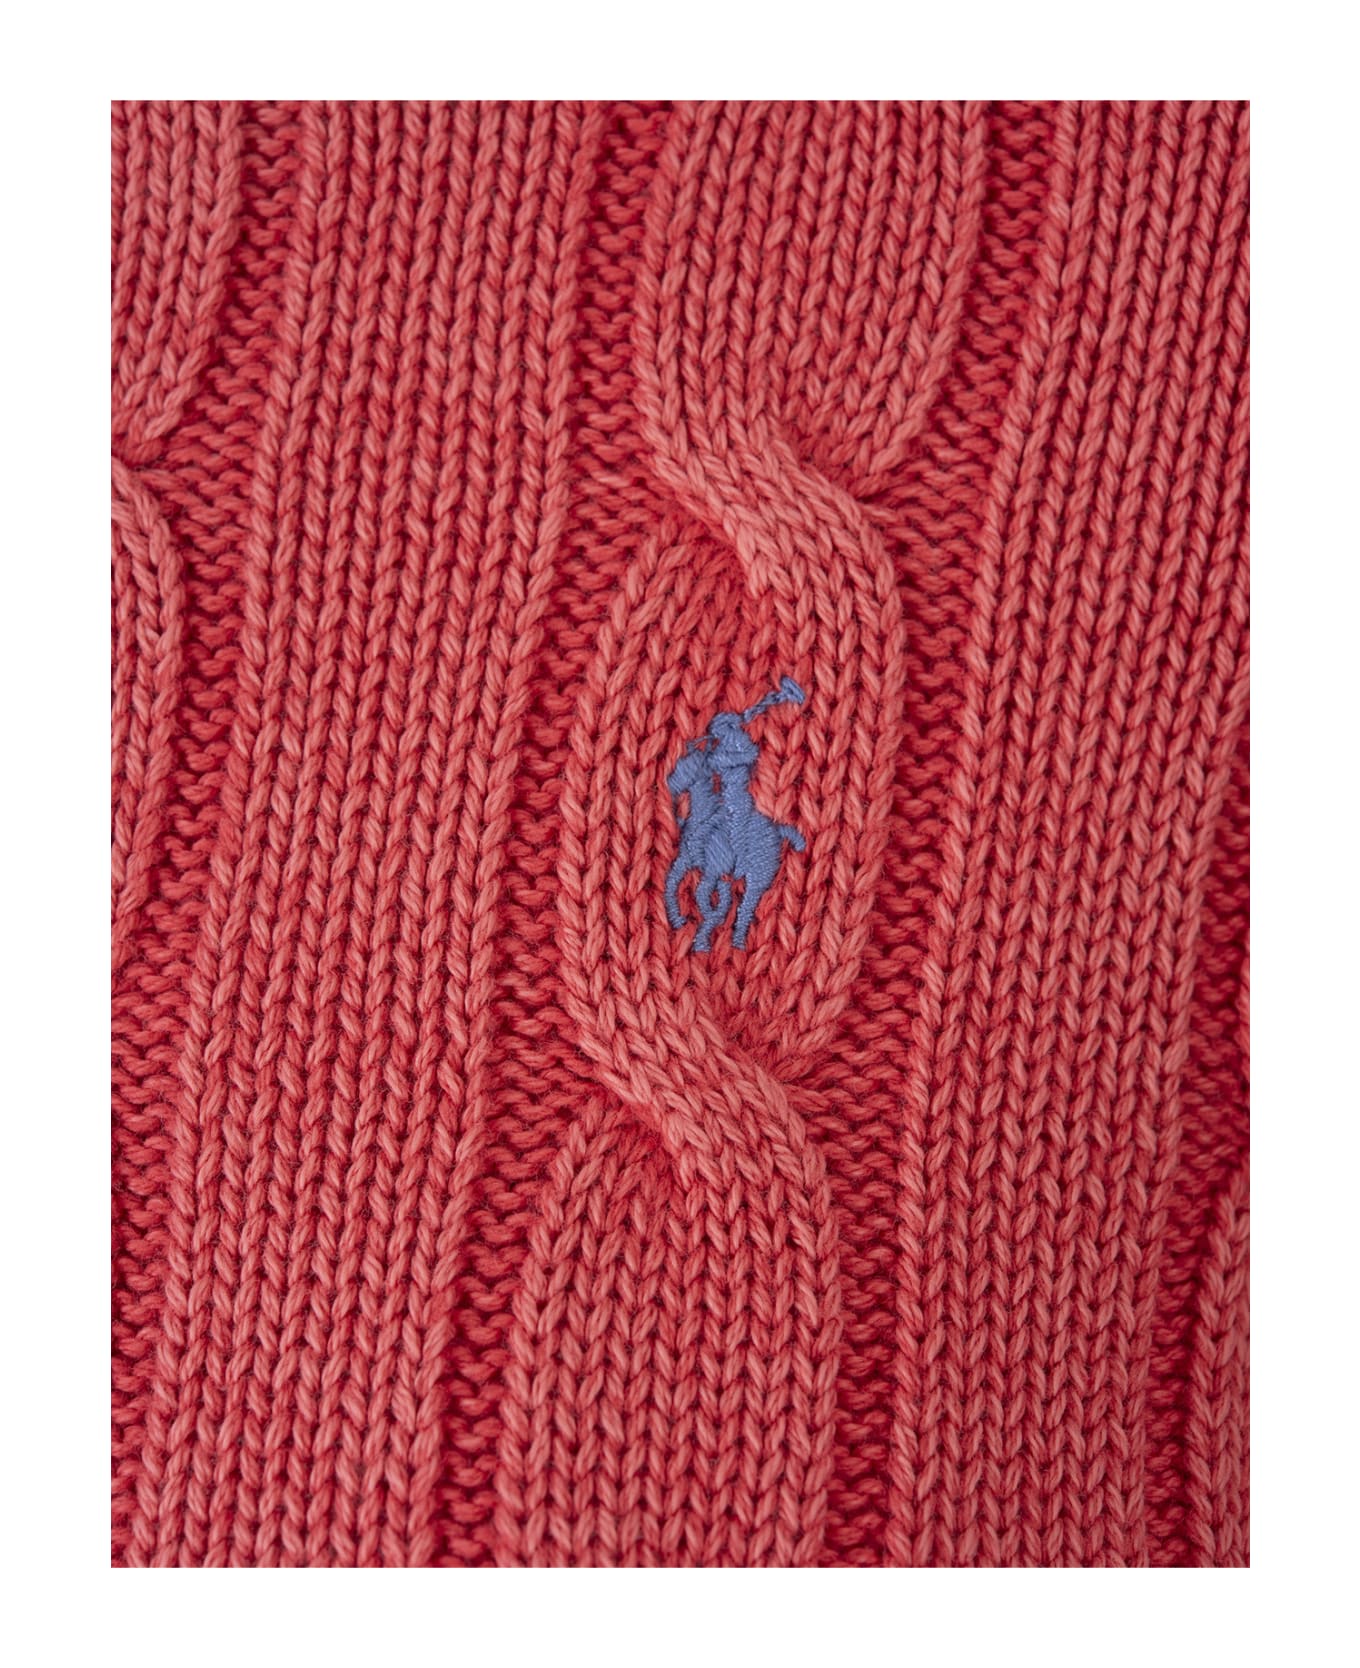 Ralph Lauren Coral Cable Cotton Sweater - Red